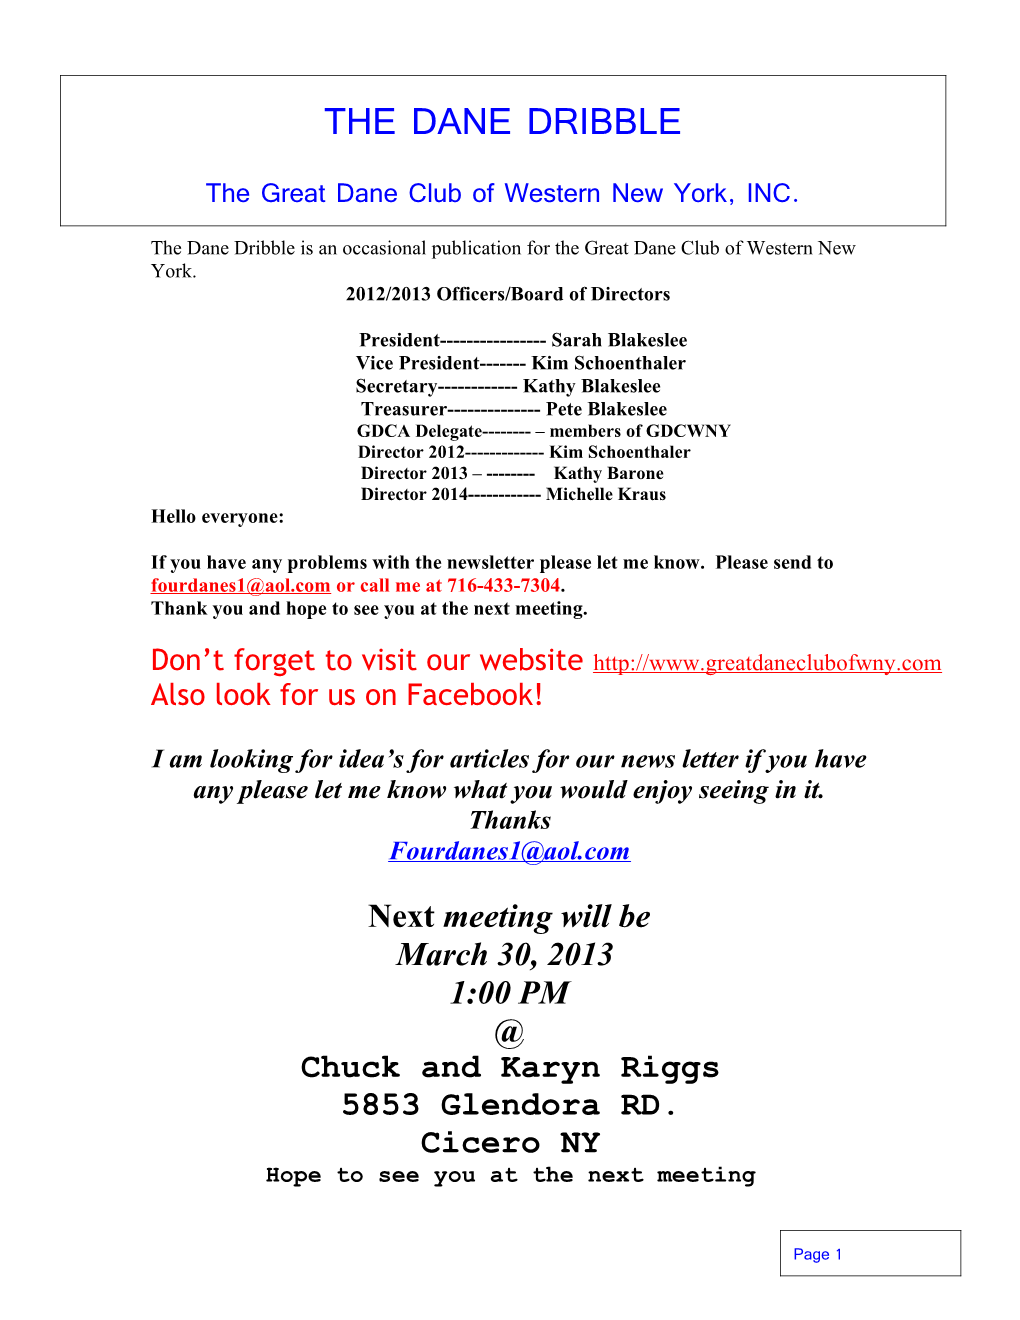 The Dane Dribble Is an Occasional Publication for the Great Dane Club of Western New York